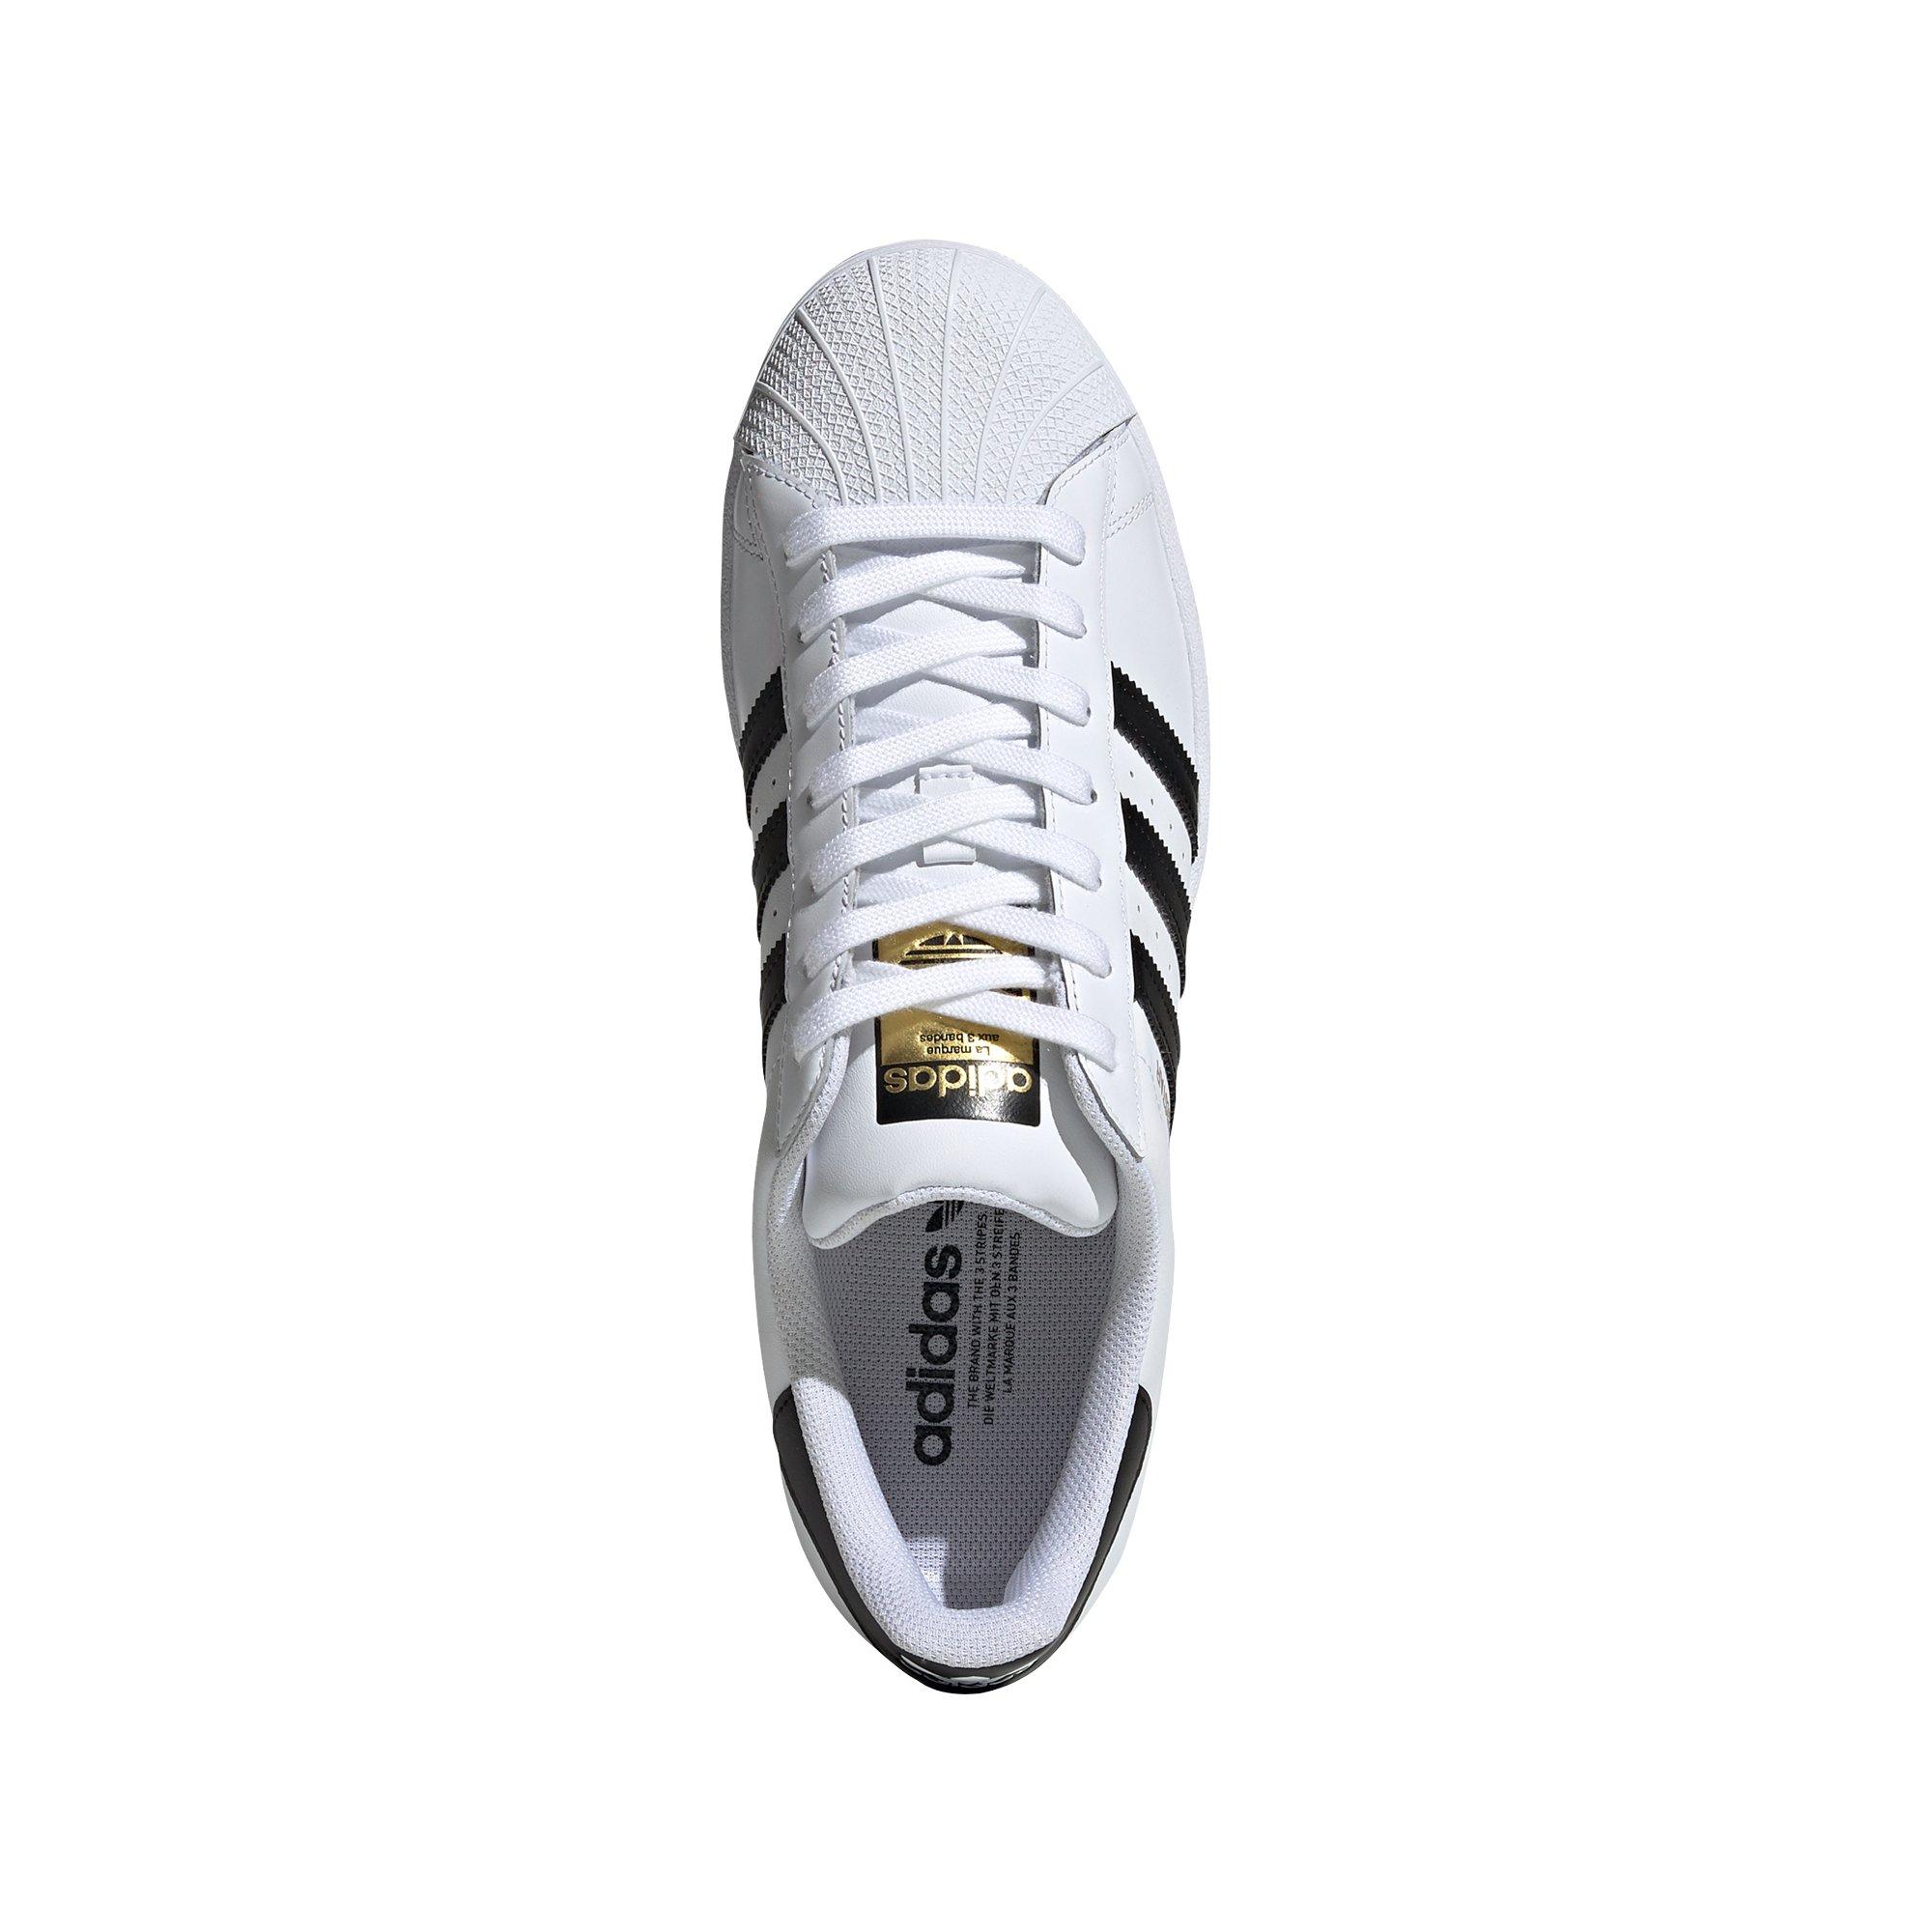 adidas, Shoes, Adidas Sneakers Old School Shell Toe White Leather Sport  Shoes Gender Fluid